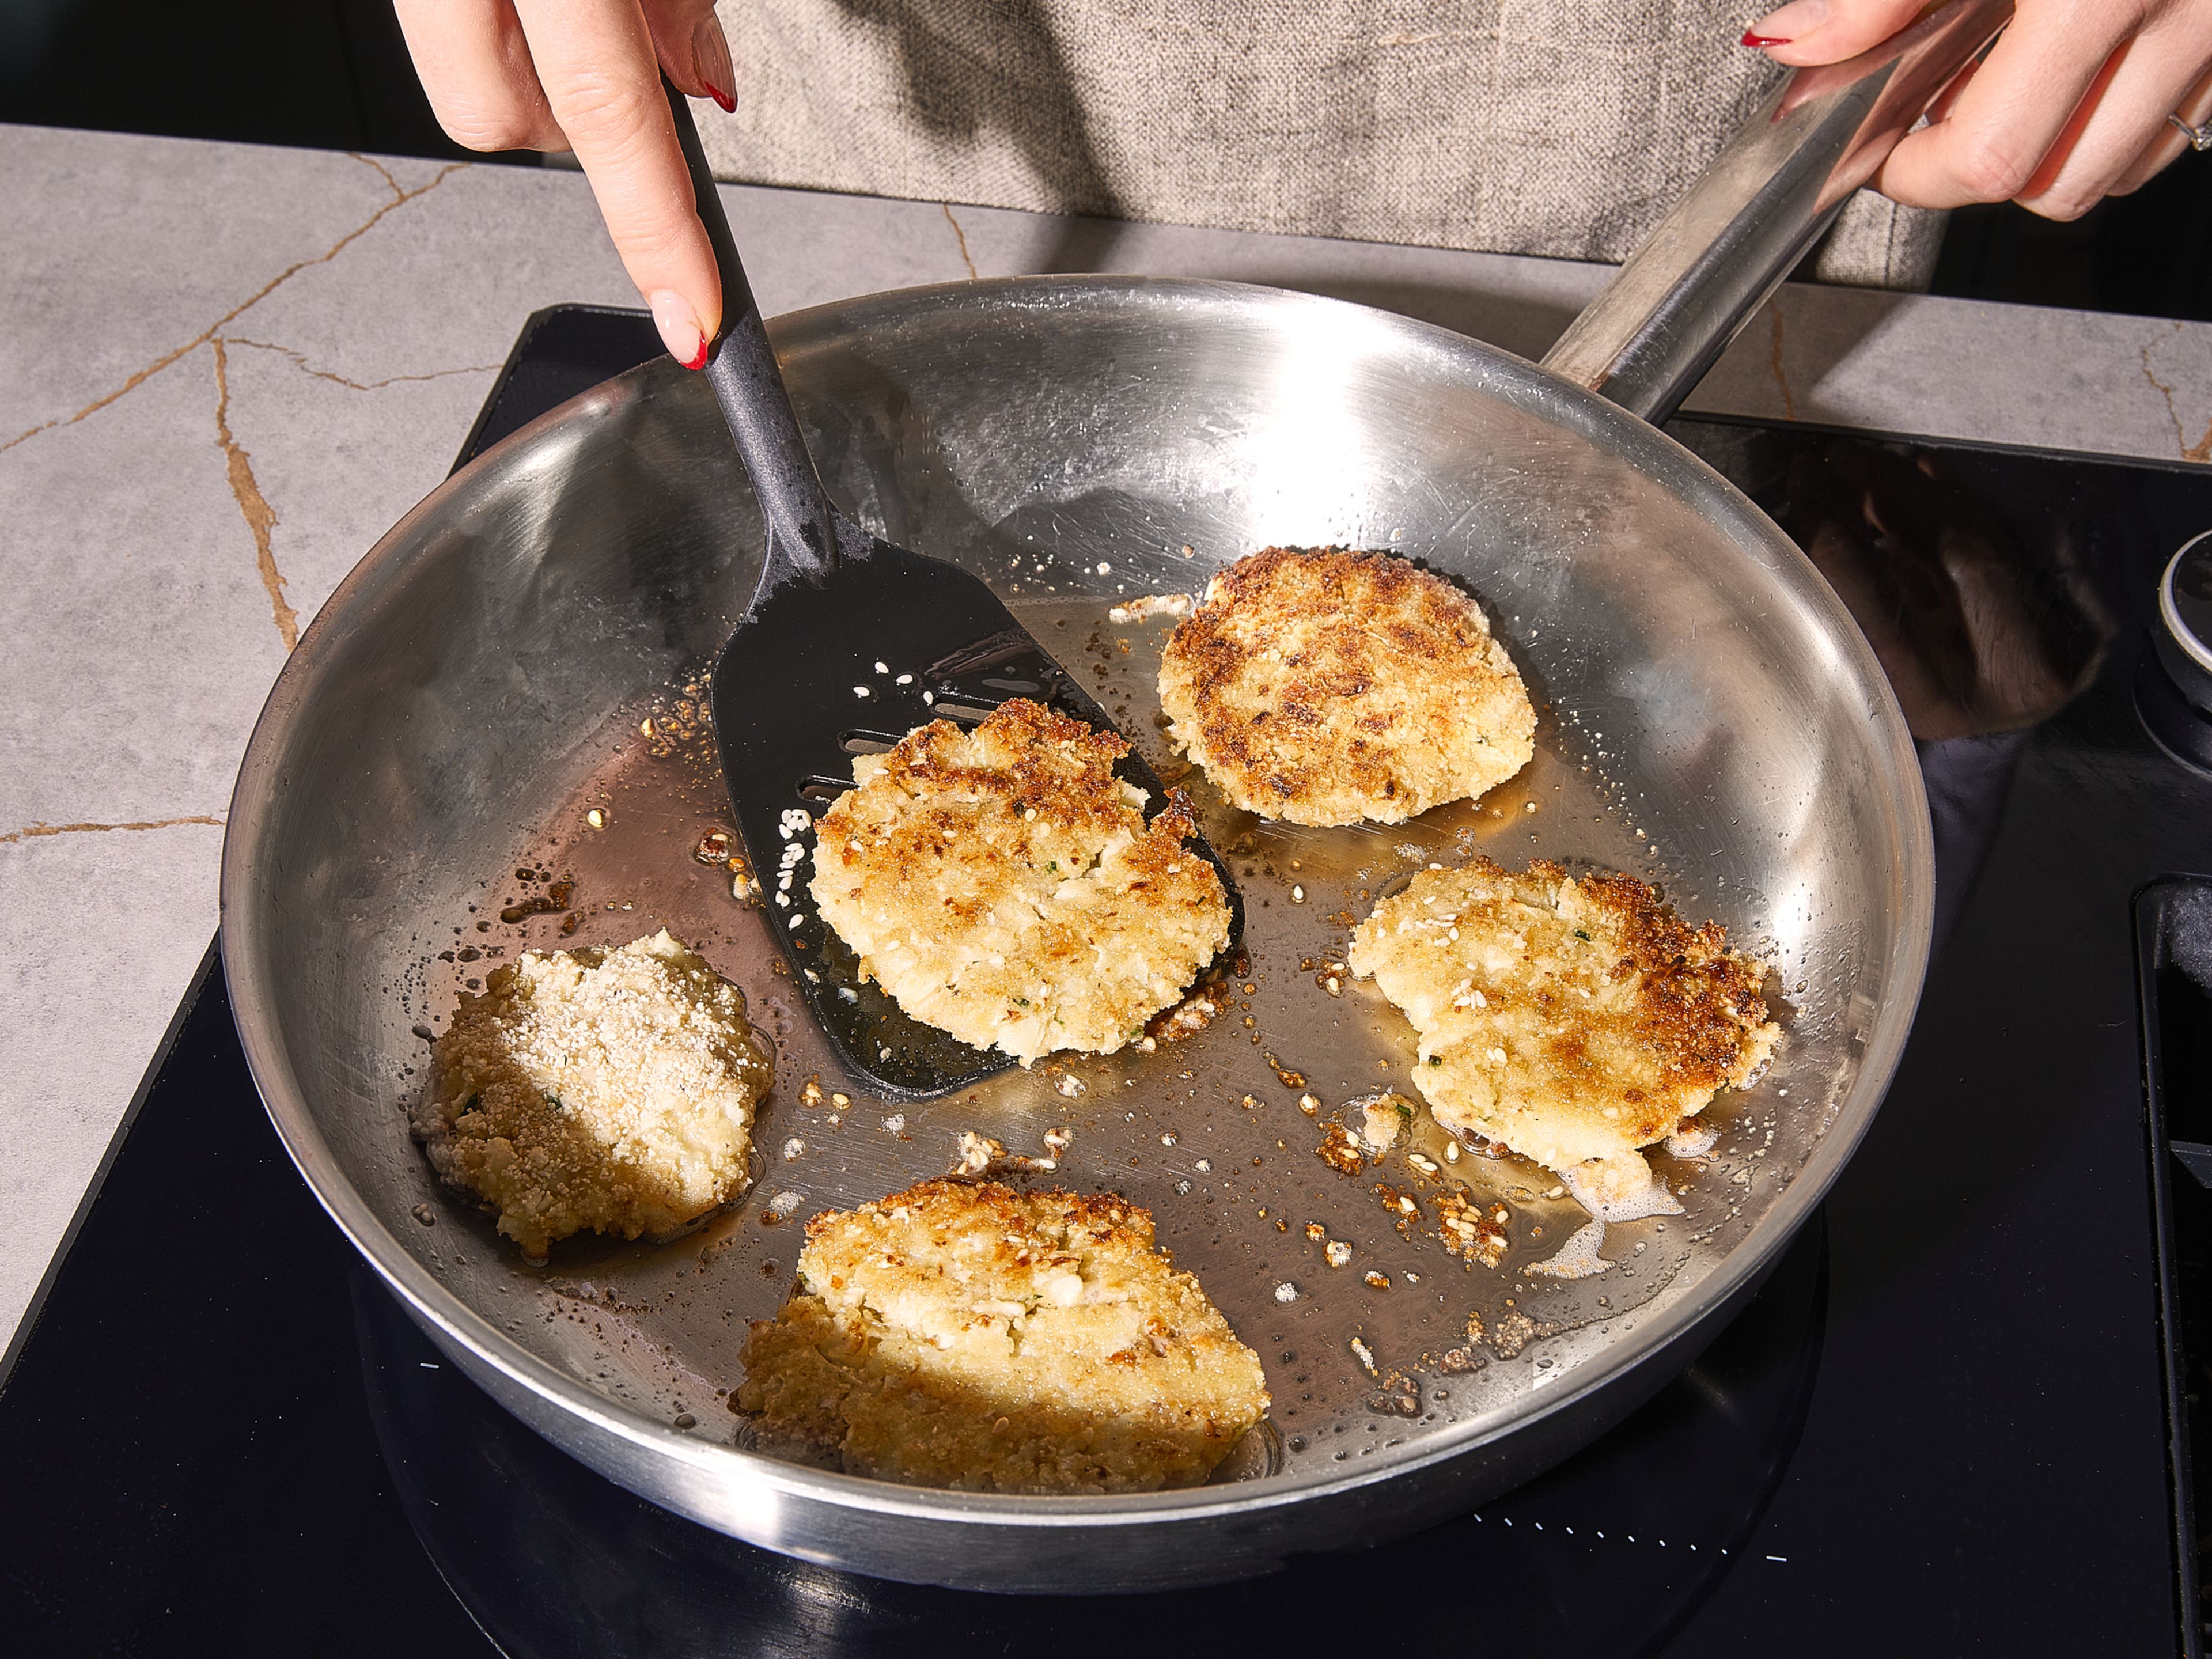 Heat a thin layer of oil in a large frying pan. Fry each fritter for approx. 4 min. per side, until golden and crispy. Do this in batches to avoid overcrowding the pan. Serve immediately with cucumber salad and quark dip.